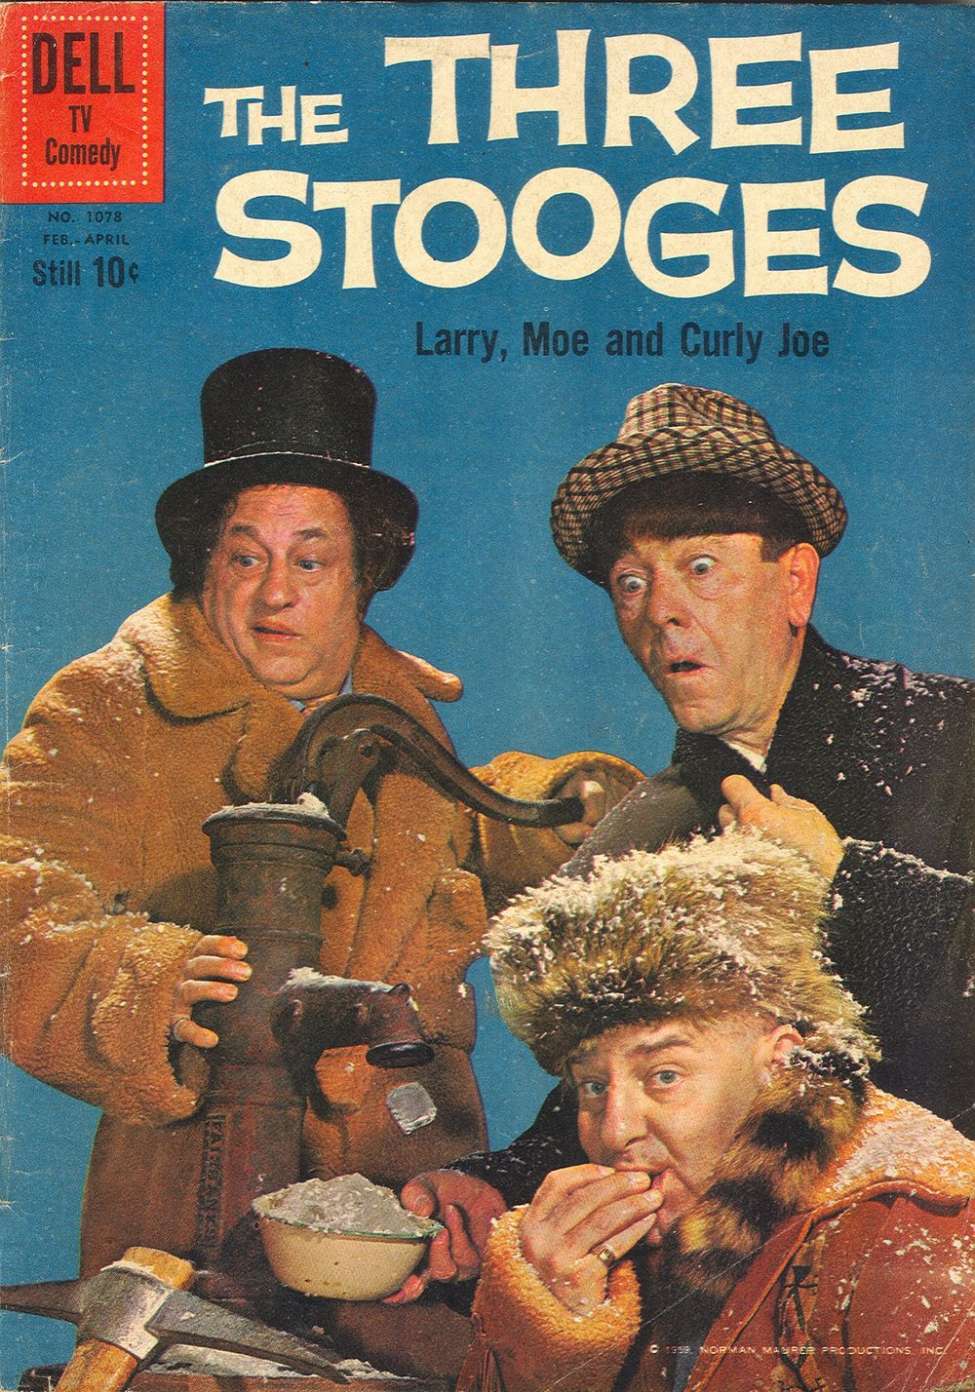 Book Cover For 1078 - The Three Stooges